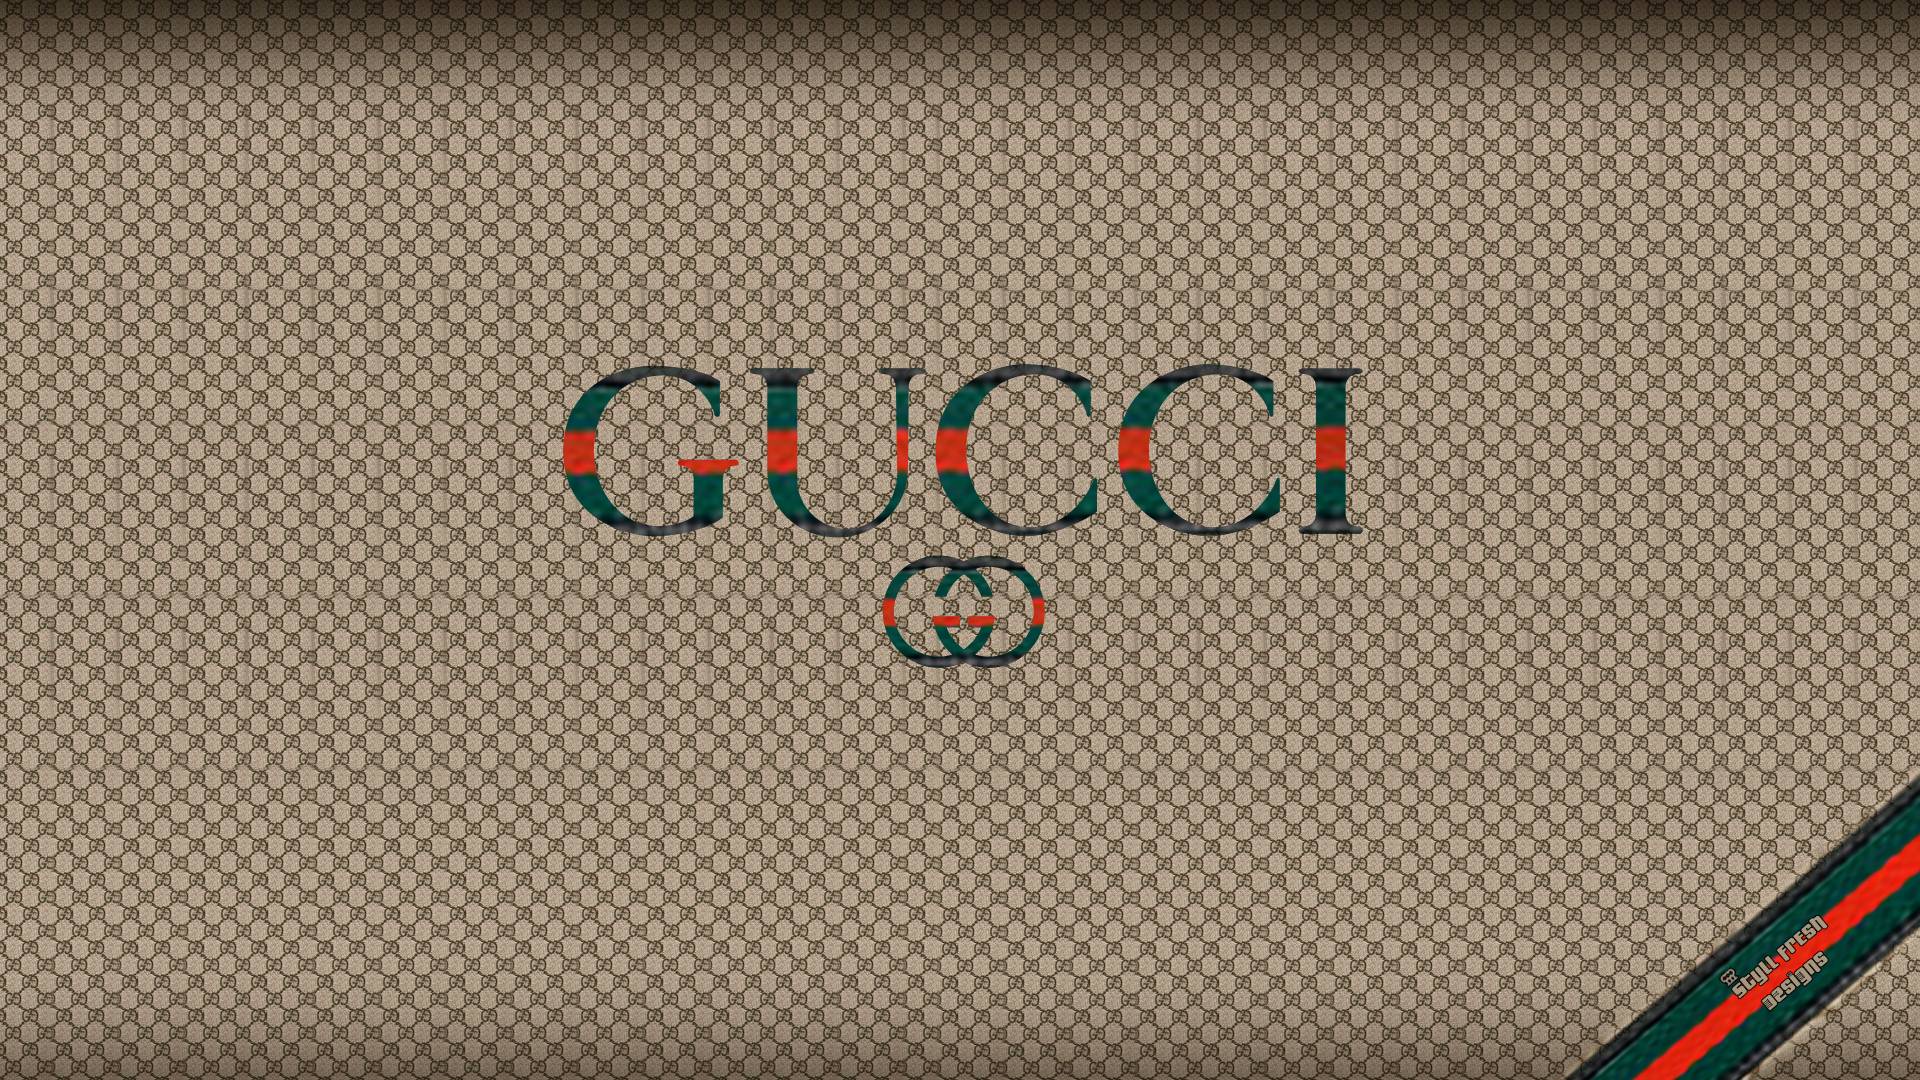 Gucci Clothing Wallpapers - Wallpaper Cave